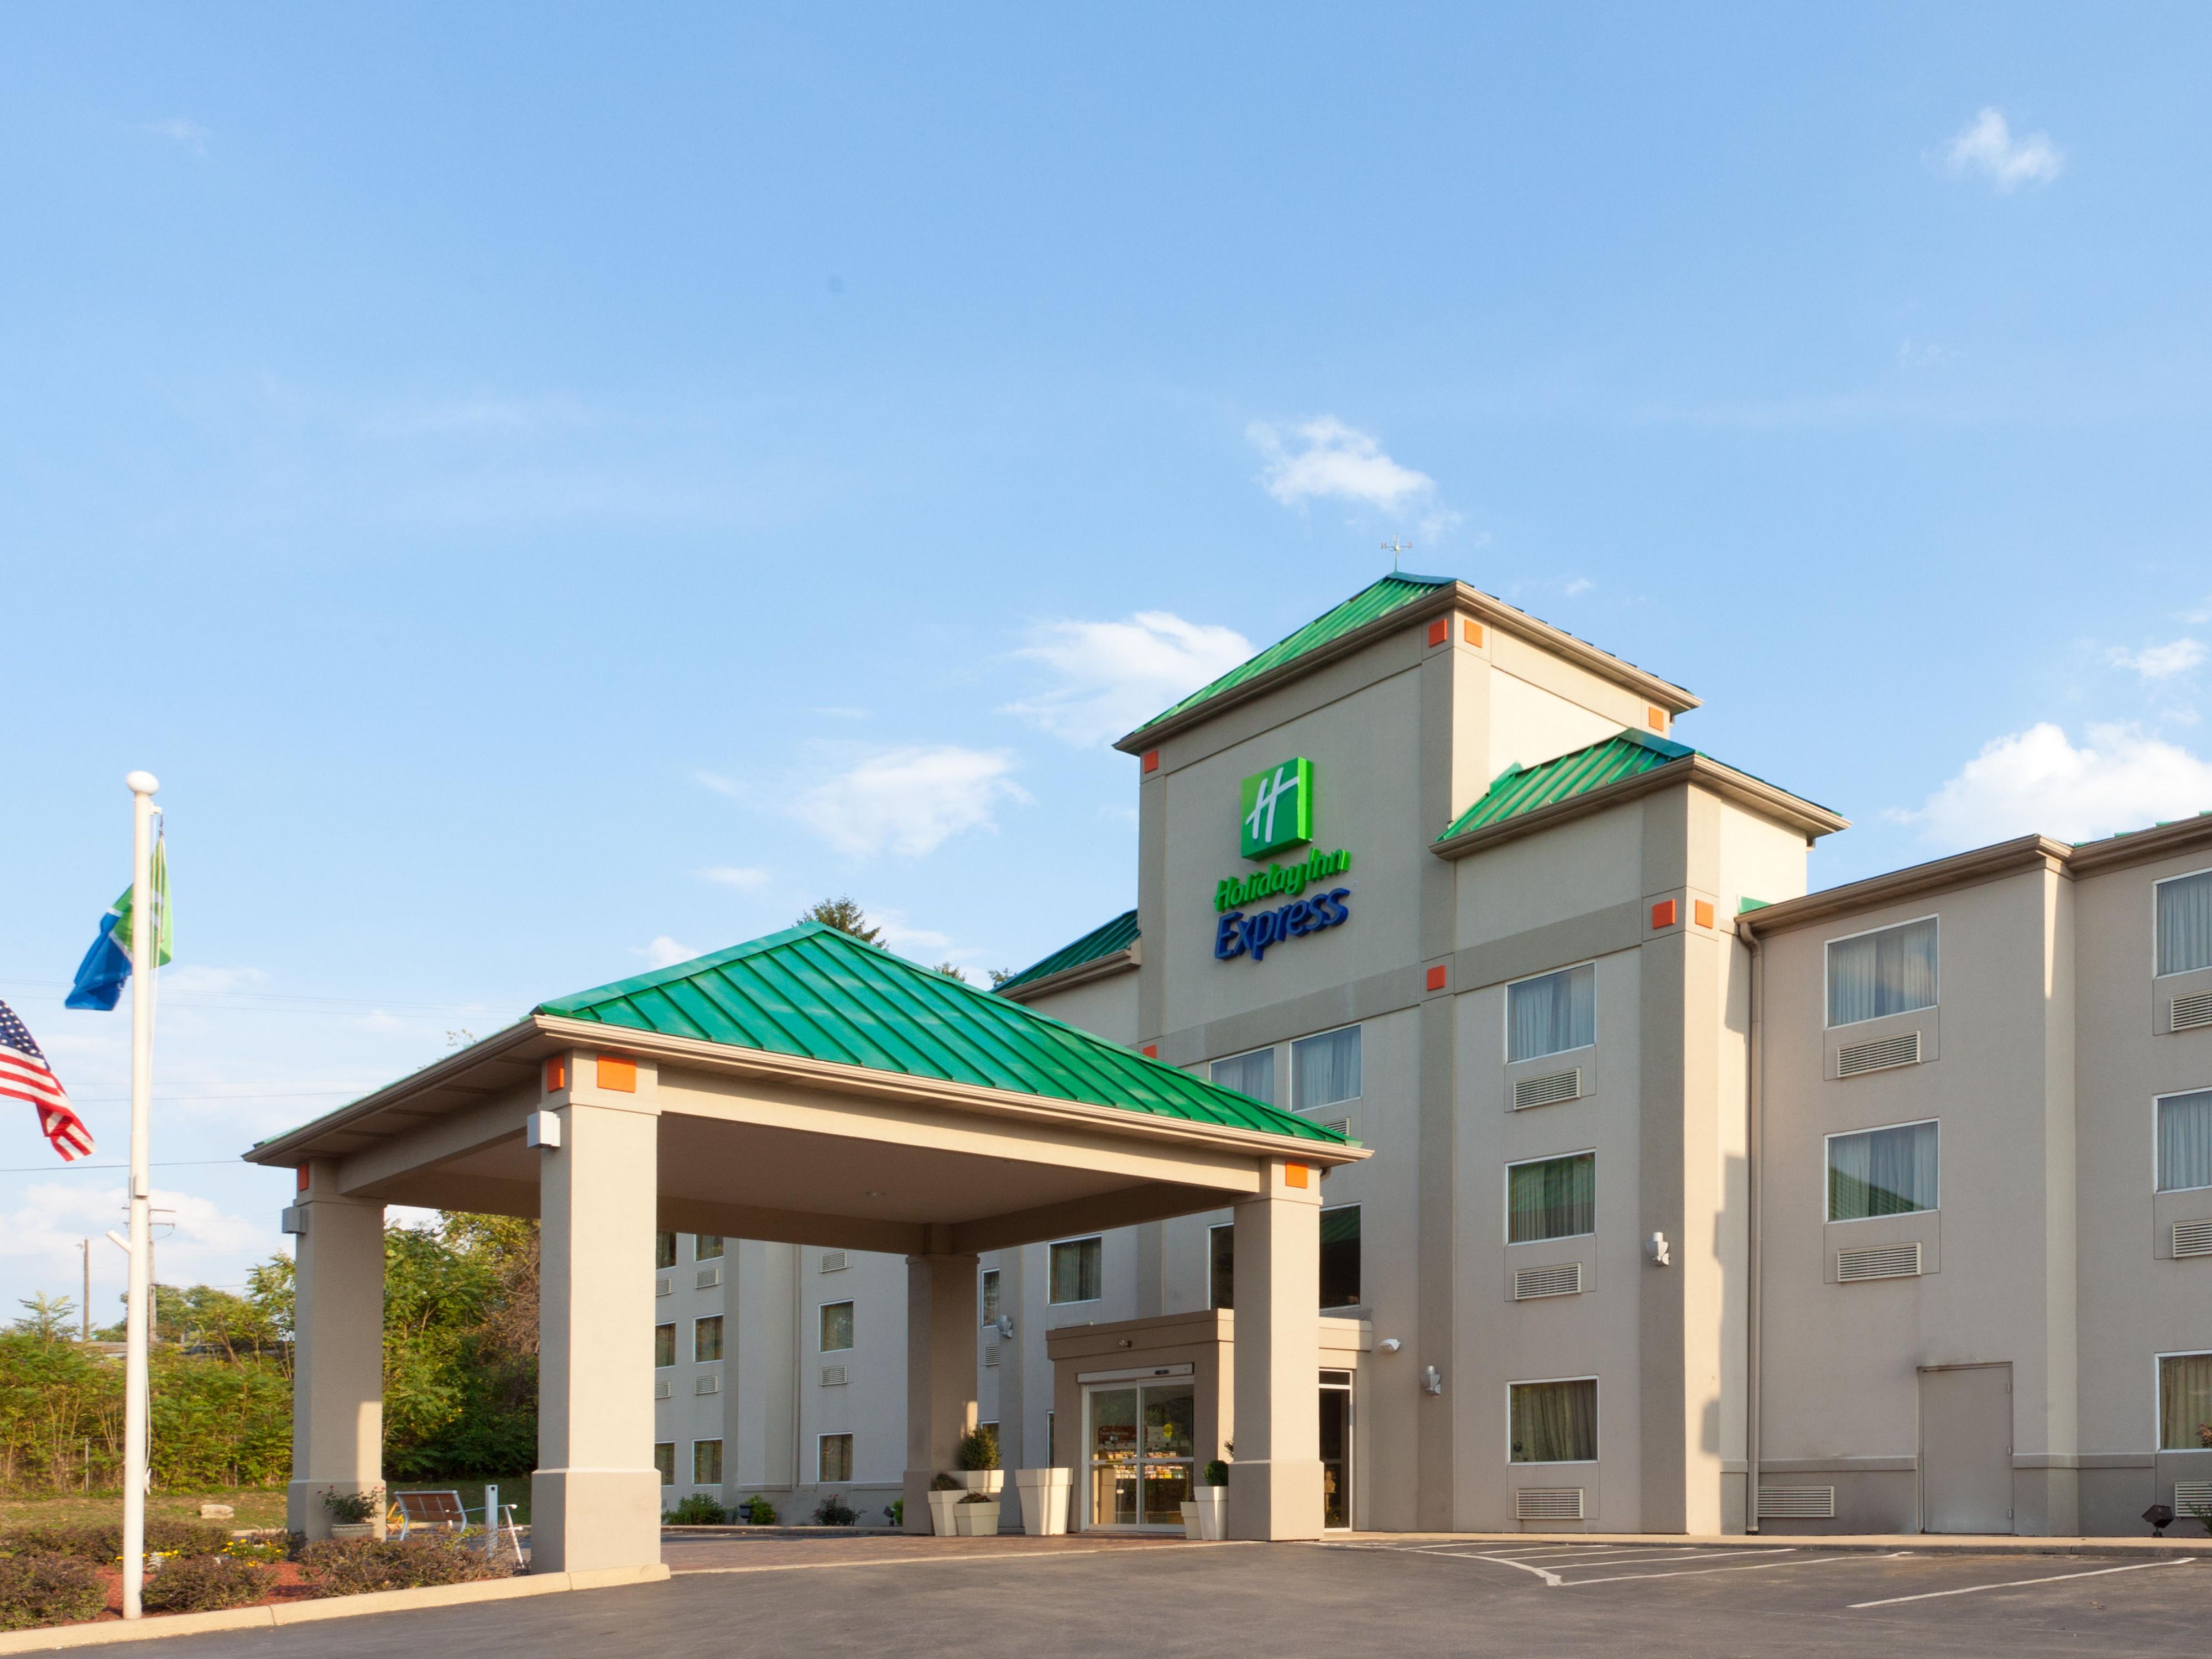 holiday inn express harmarville hotels budget hotels in harmarville by ihg holiday inn express harmarville hotels